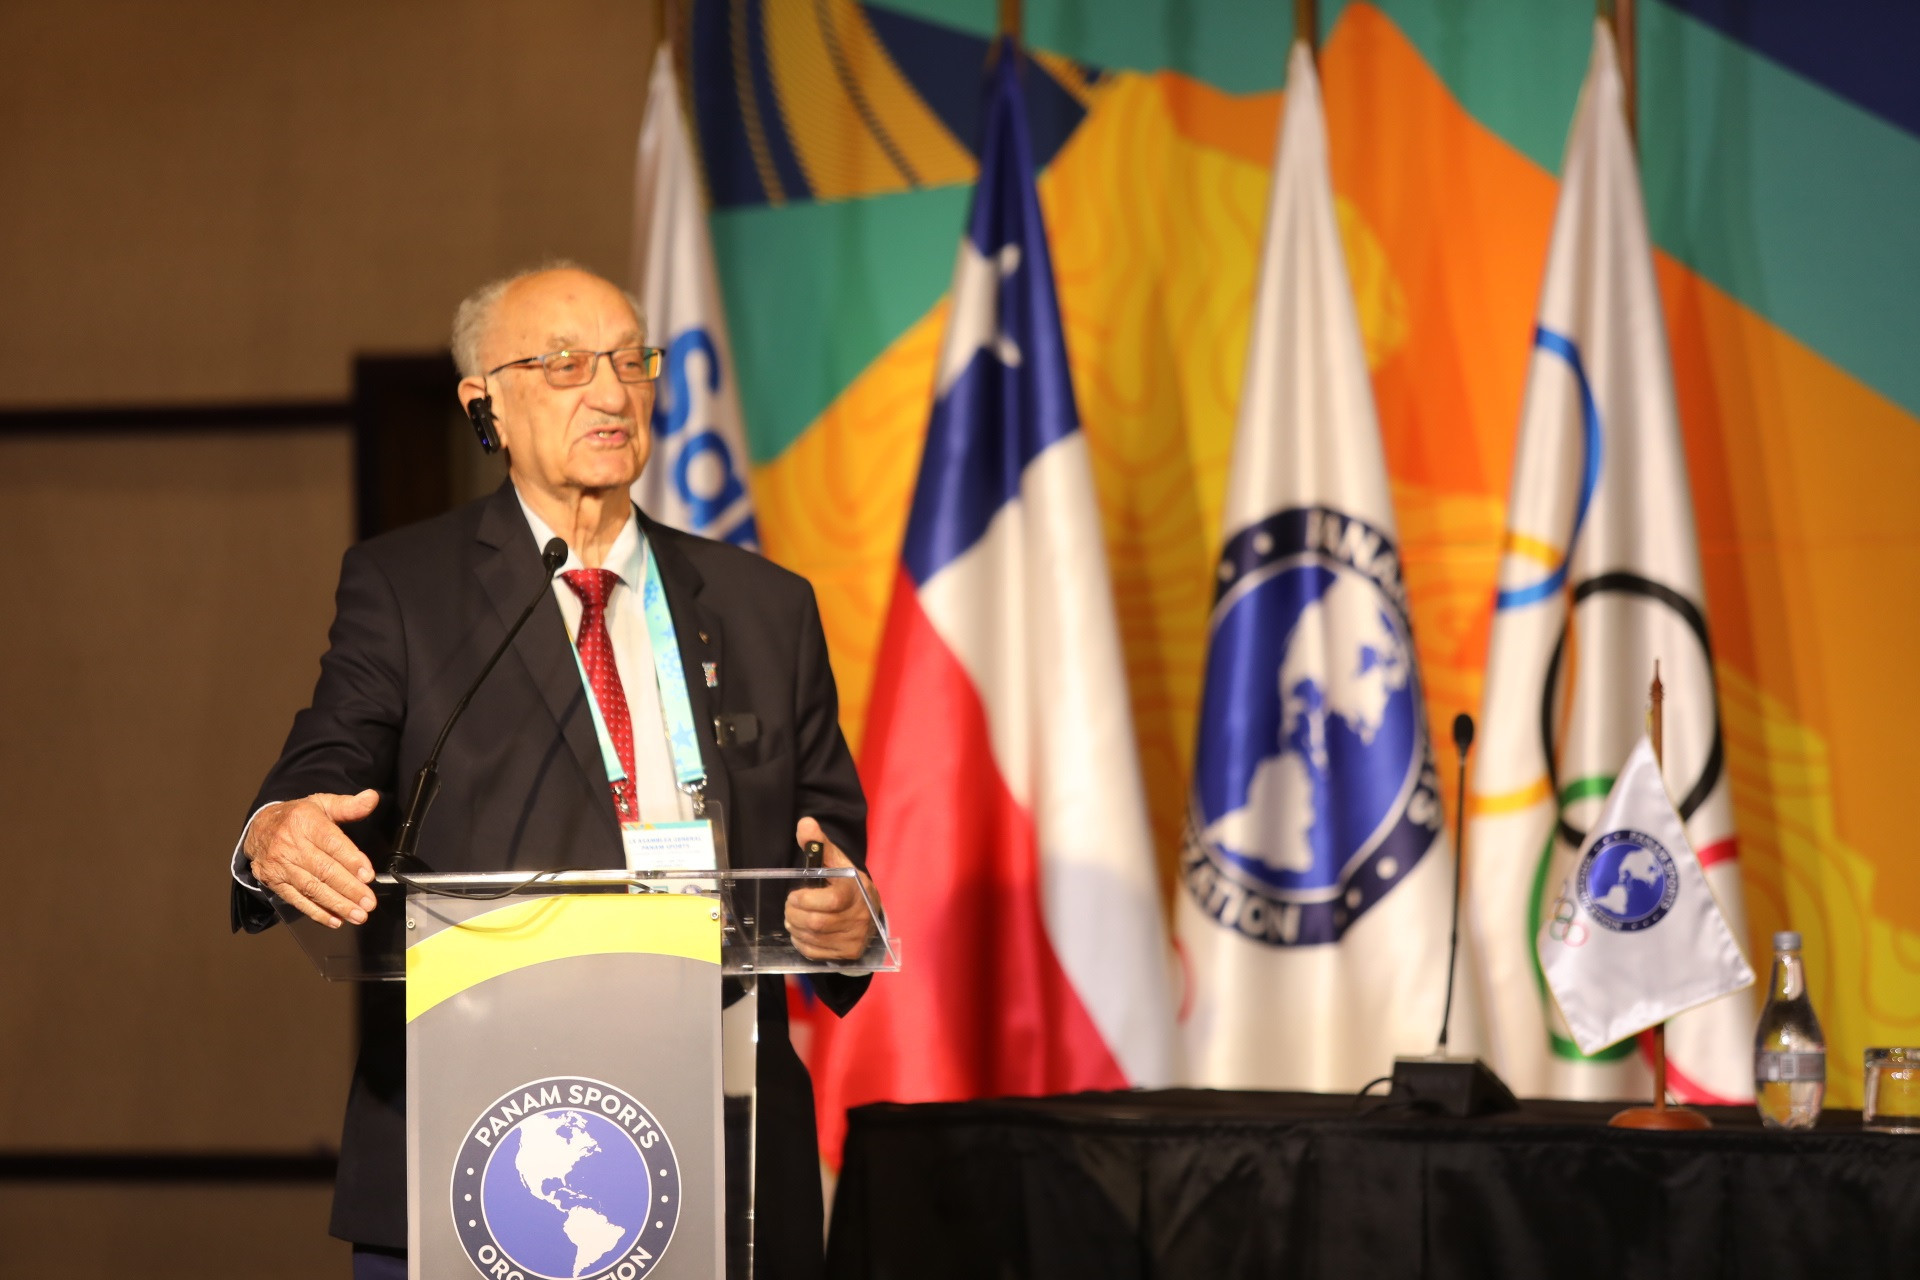 Michael Fennell, chair of the Panam Sports' Technical Commission for Santiago 2023, raised concerns over preparations for next year's Pan American Games ©Panam Sports